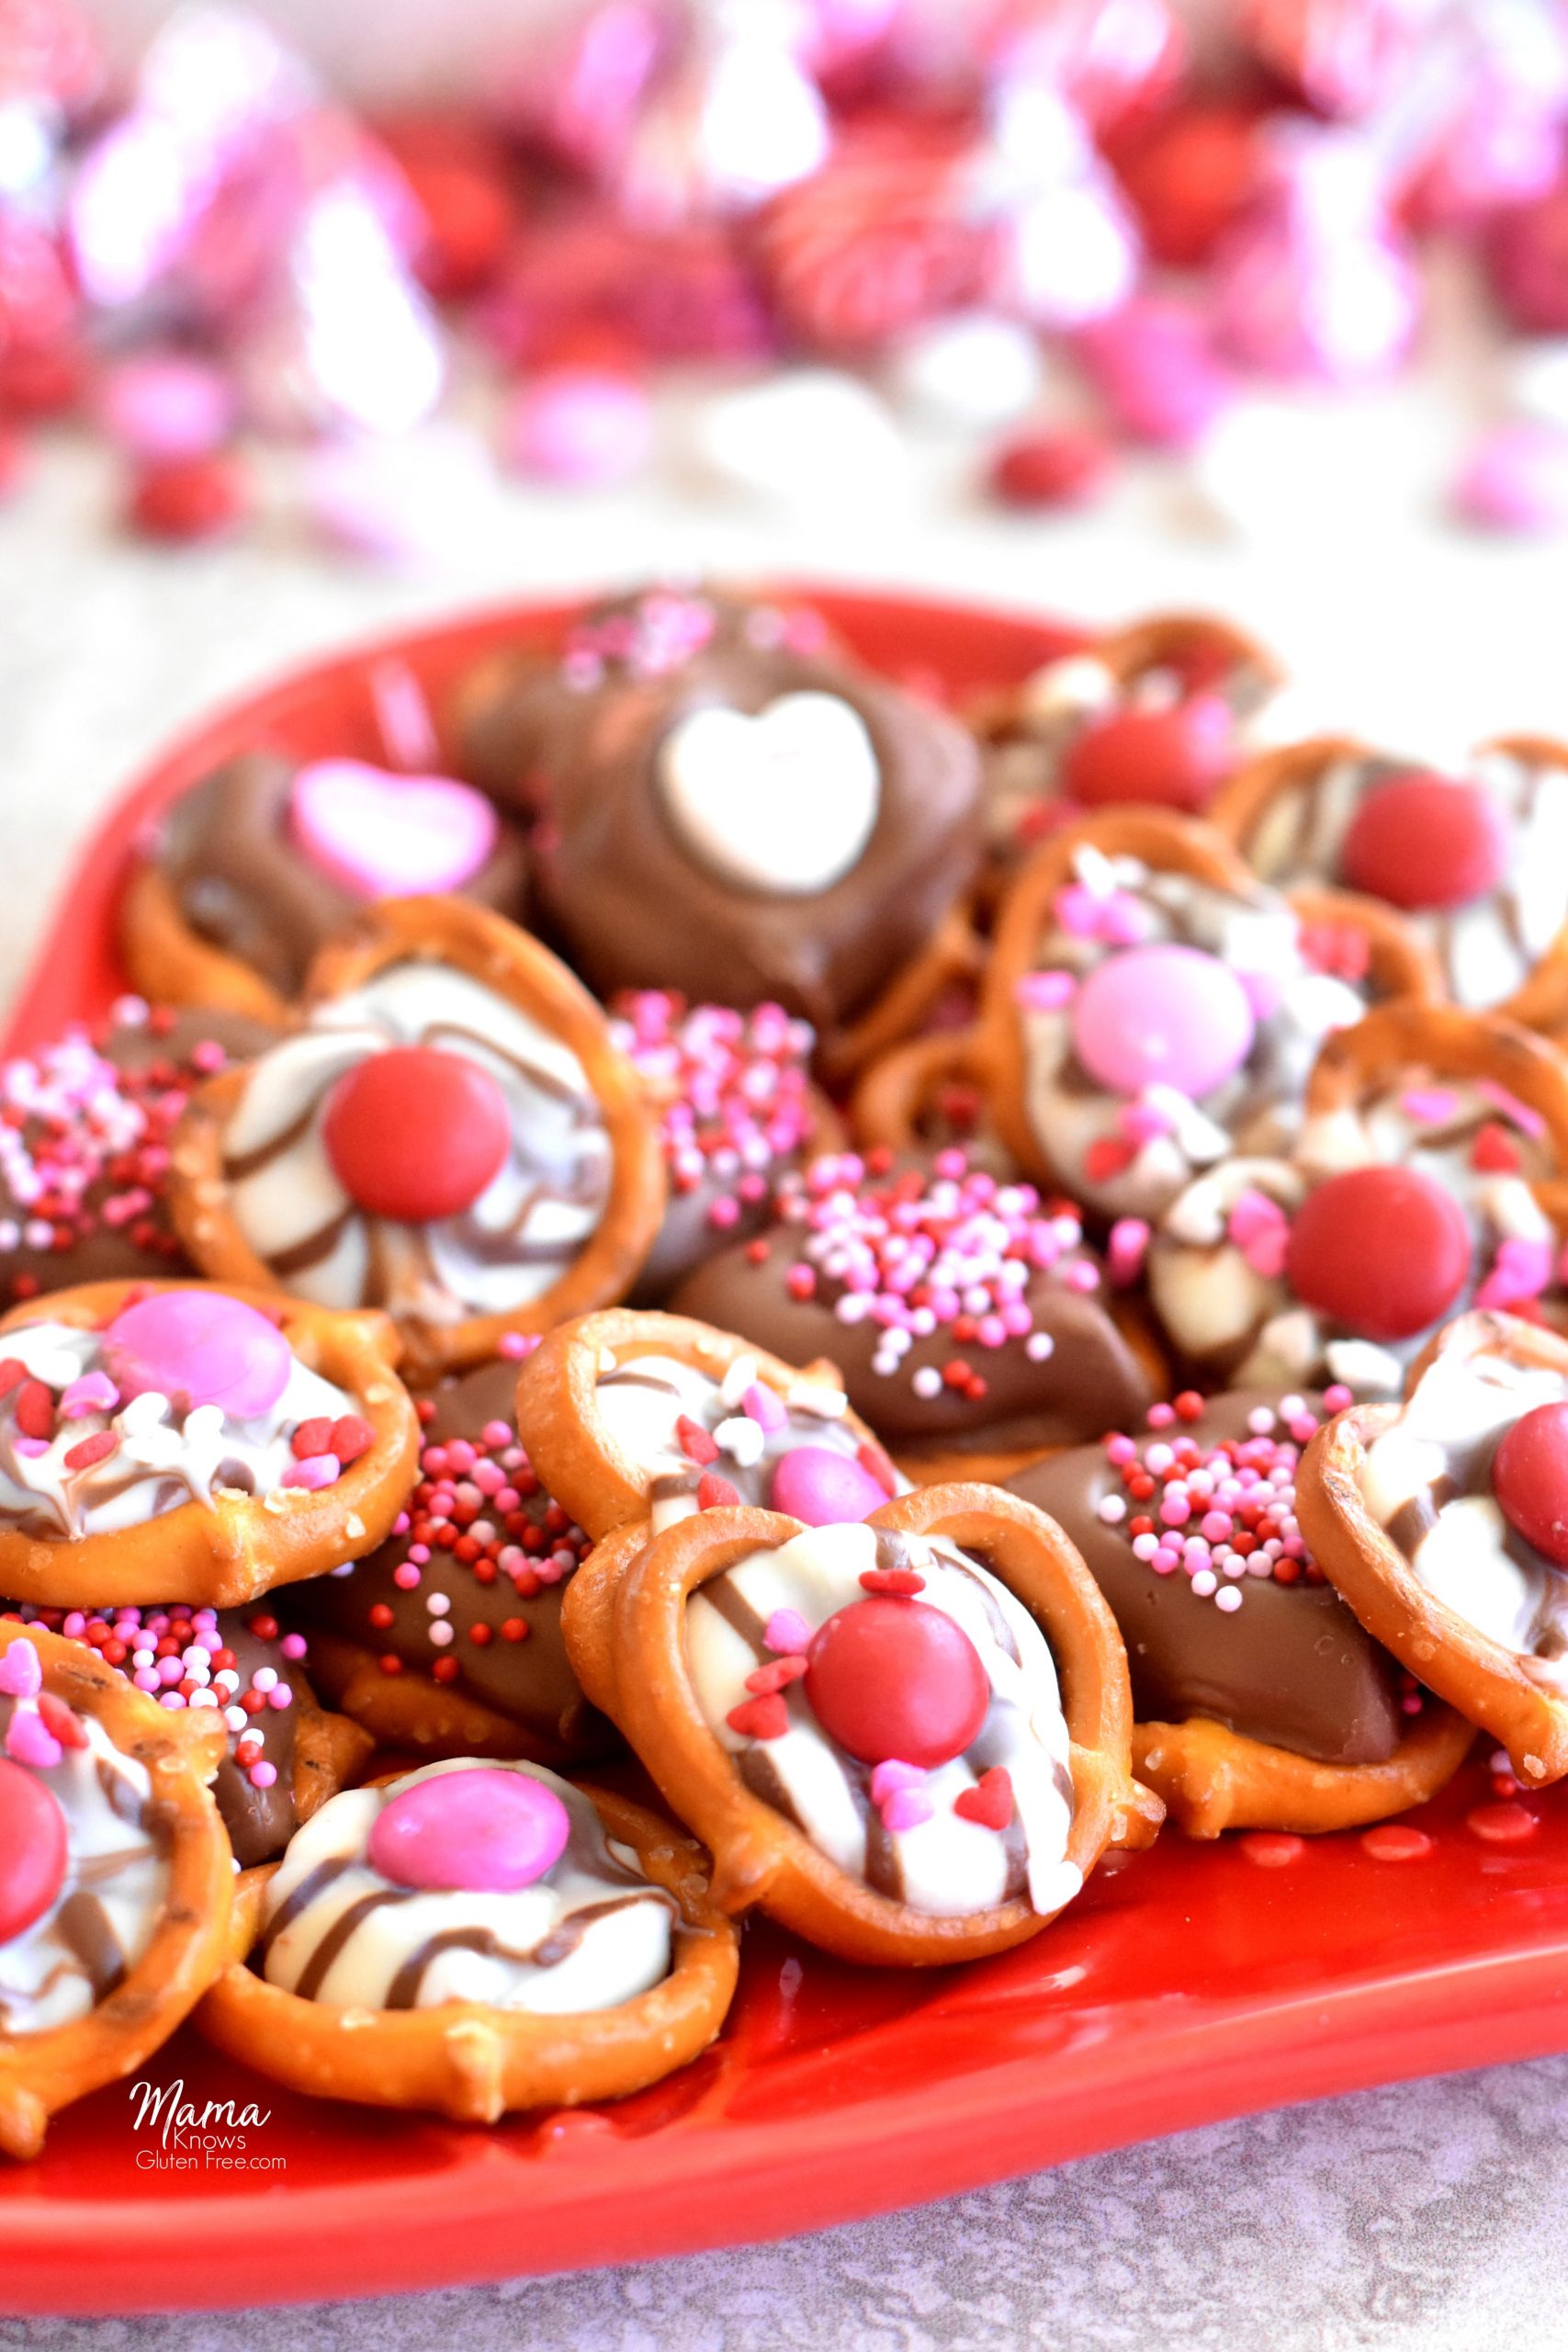 Chocolate Covered Pretzels For Valentines Day
 Gluten Free Chocolate Covered Pretzels for Valentine s Day